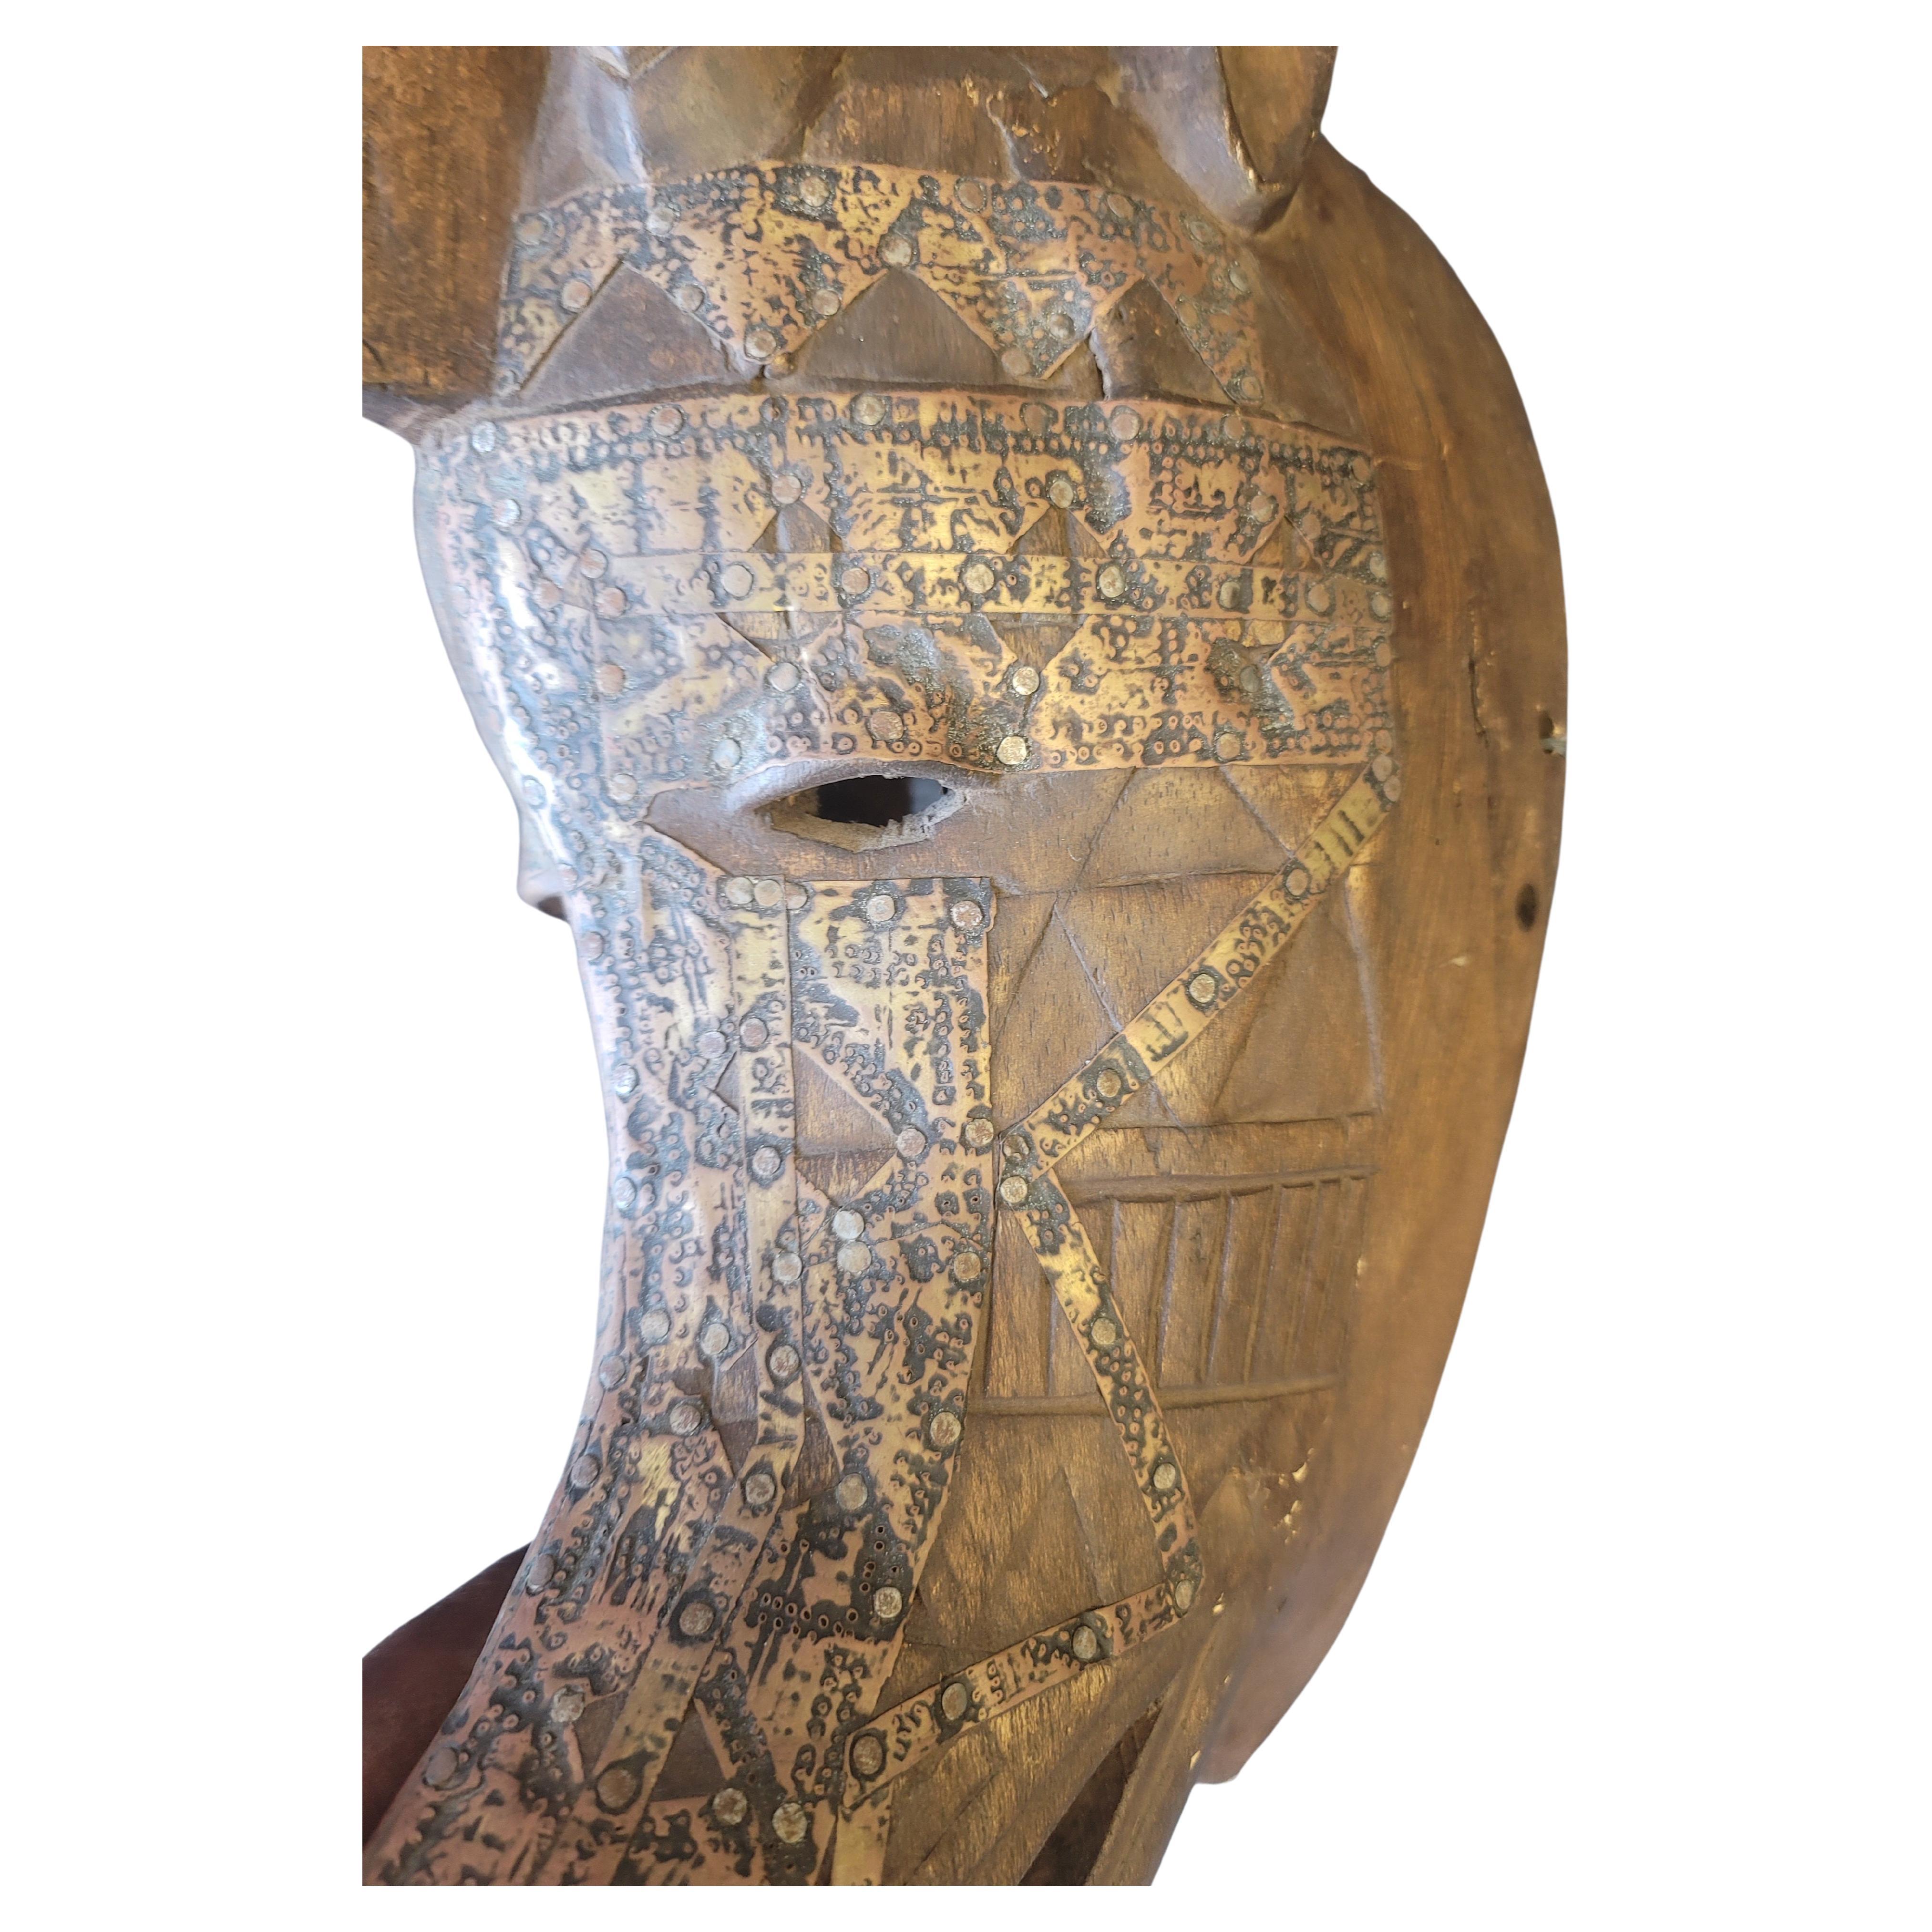 African brass Ornate over wood Totemic sculpture animal in human or vice versa.
Measures: 8